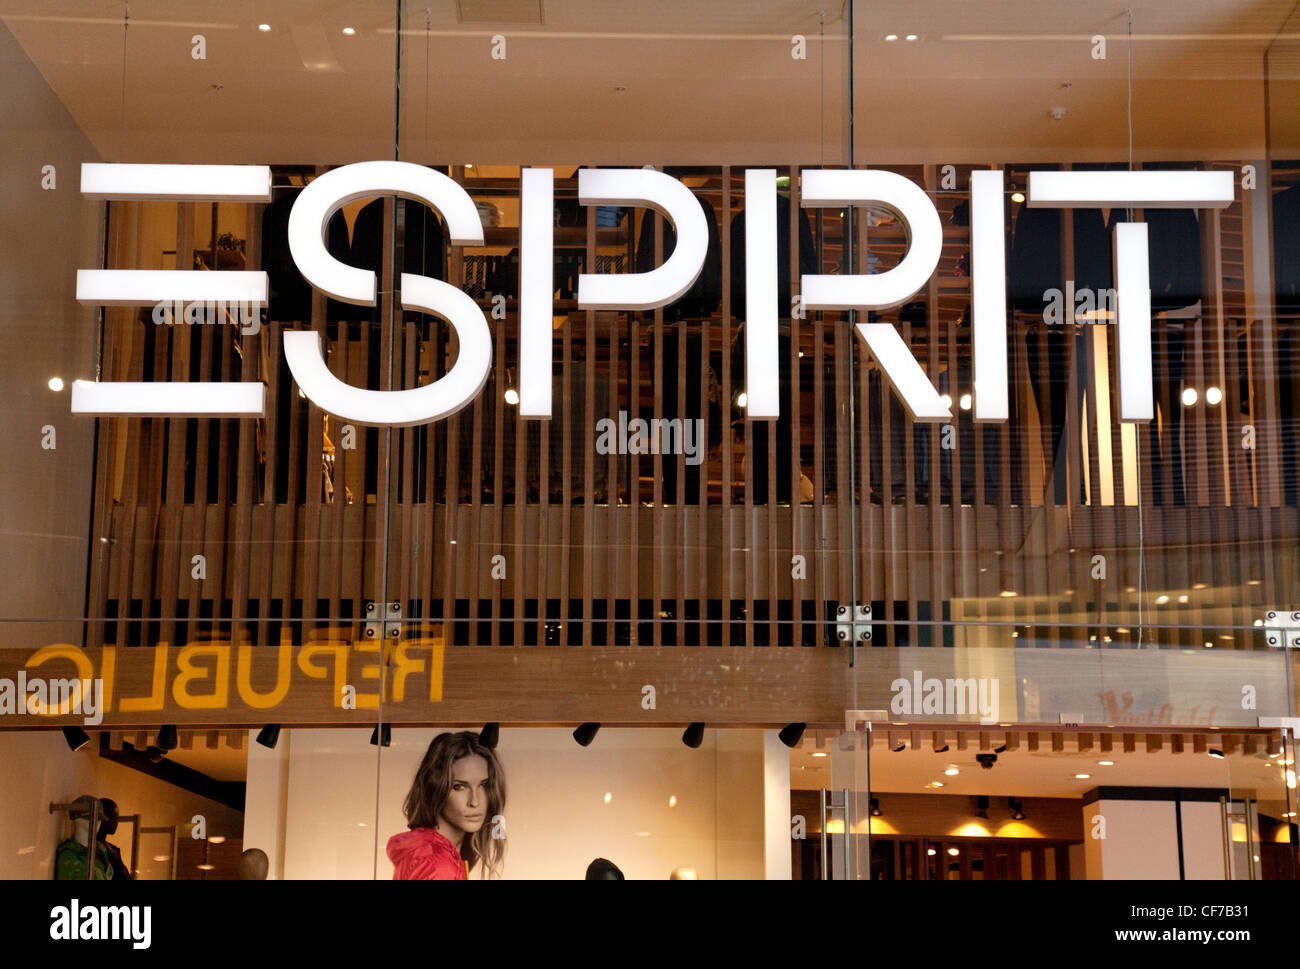 The Esprit fashion store sign, Westfield shopping centre Stratford London UK  Stock Photo - Alamy